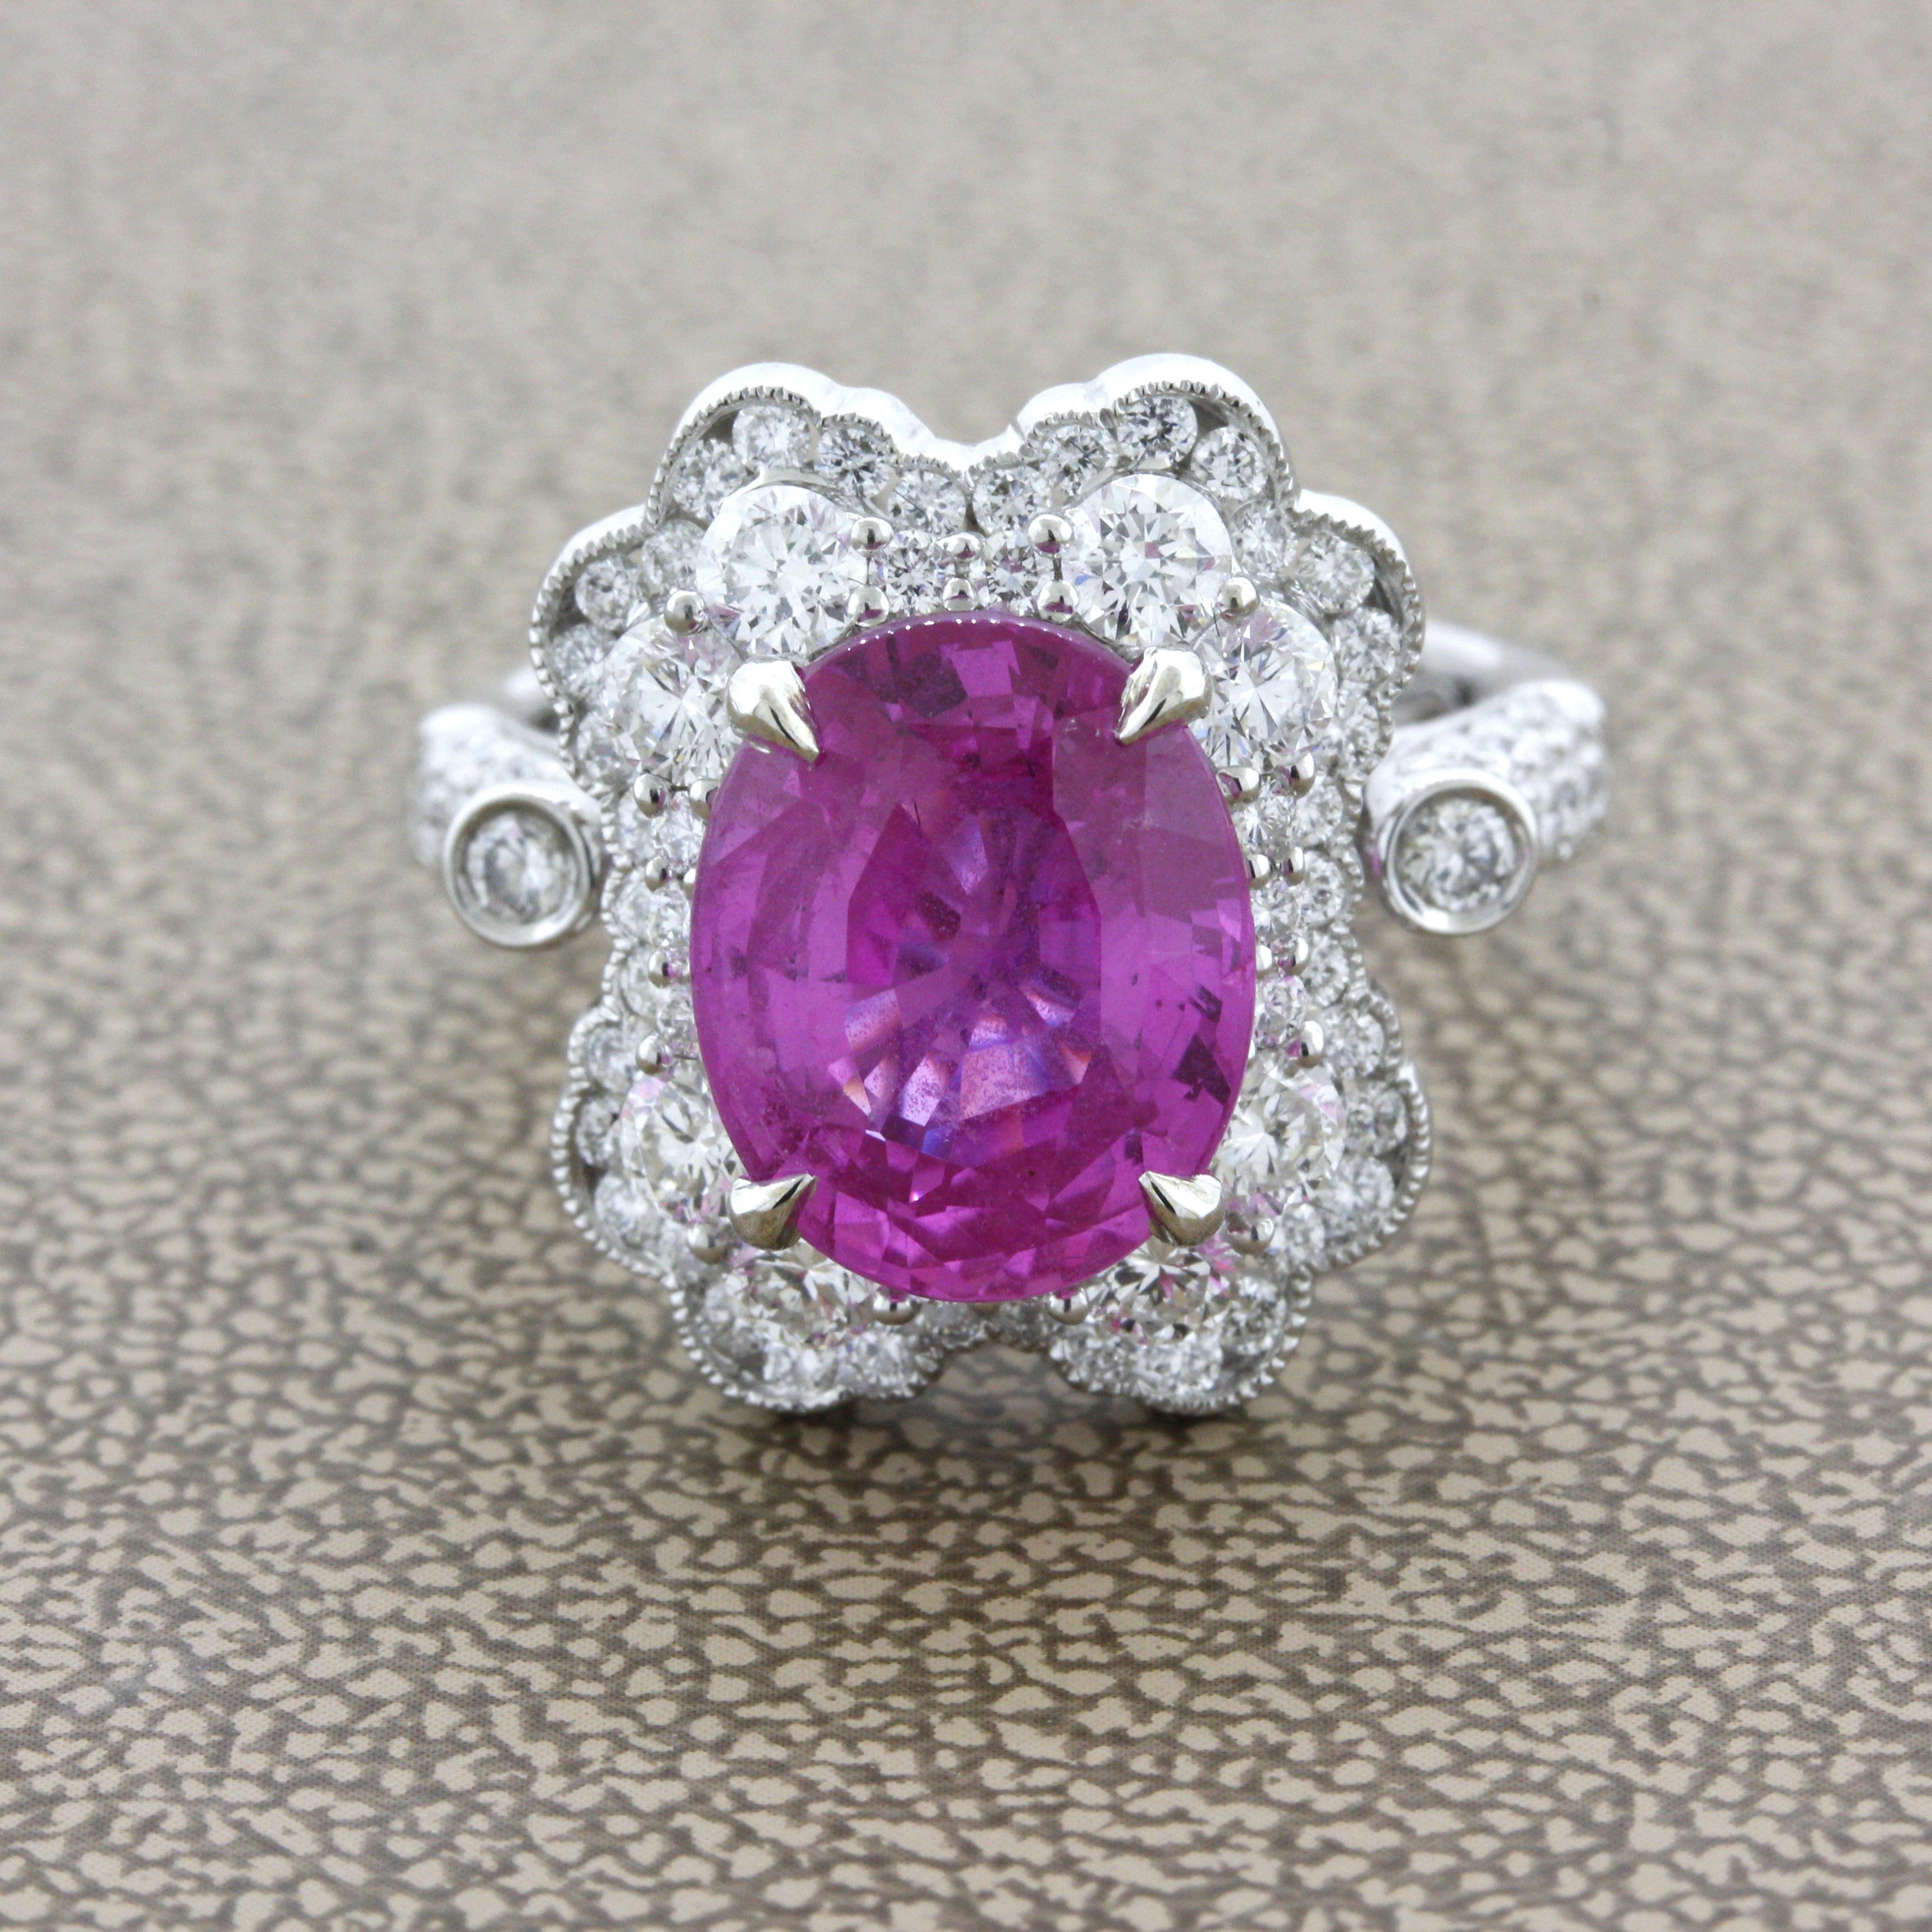 A rich hot-pink sapphire takes center stage weighing an impressive 5.18 carats. The color of the sapphire is sharp and bright as the crystal is very clean, eye clean. It has been certified by the AGL as having a pure pink color and almost treatment